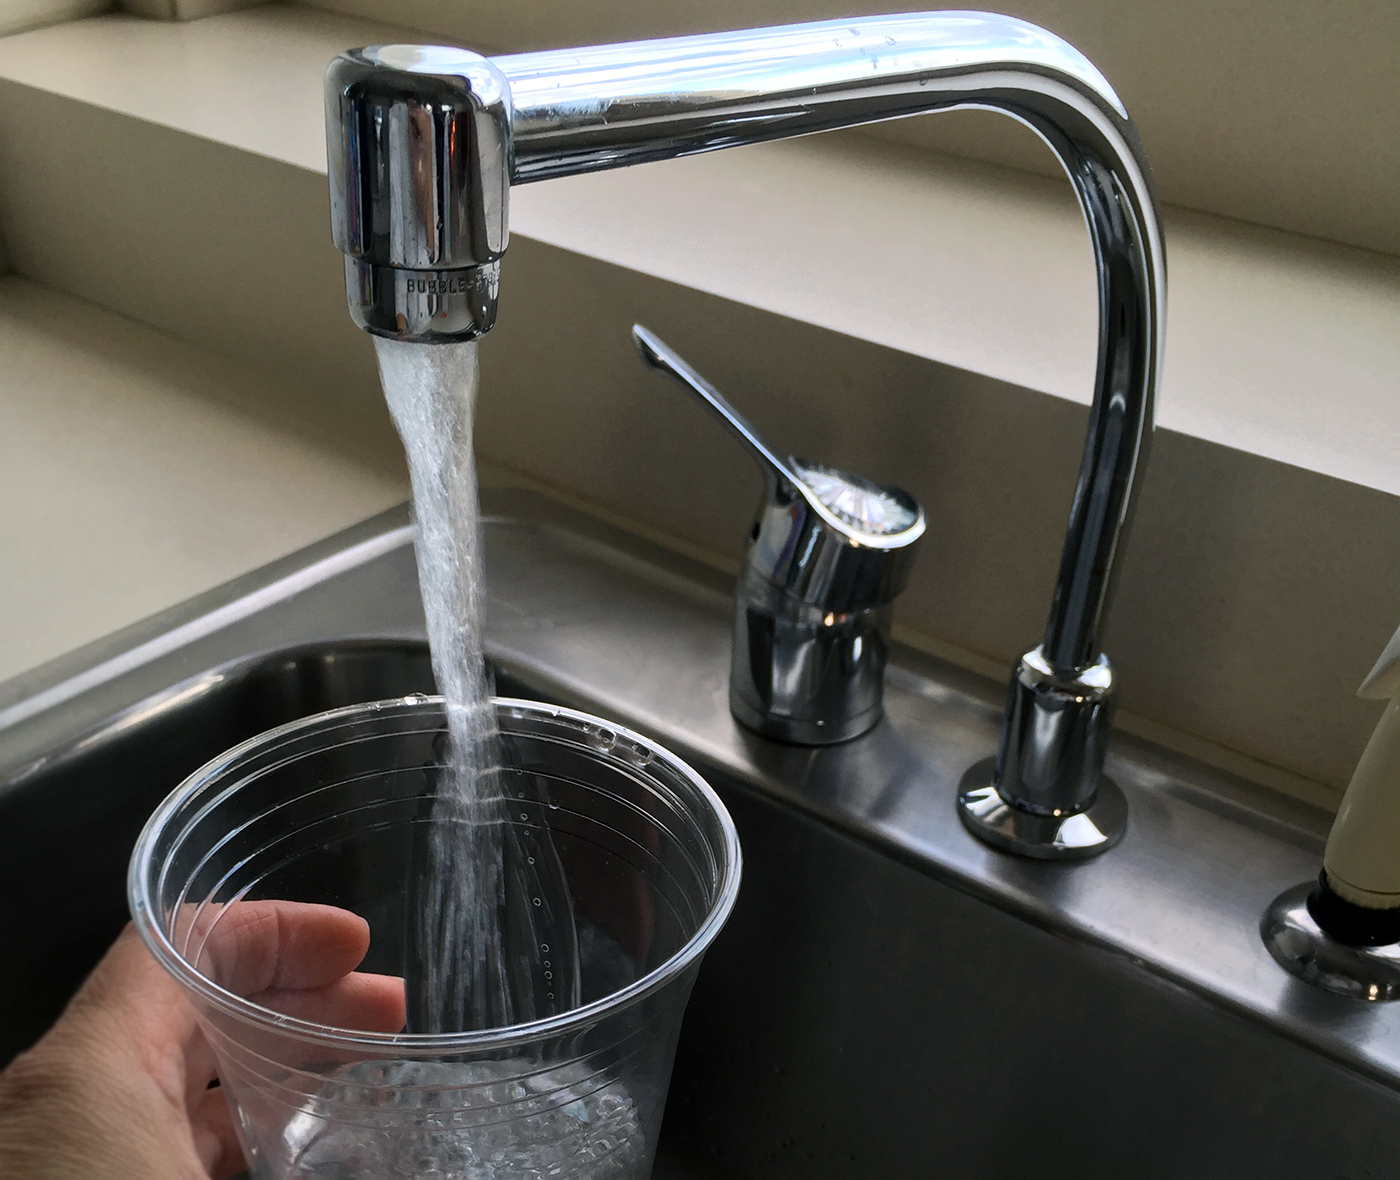 A hand is shown filling up a clear plastic cup under a water faucet.